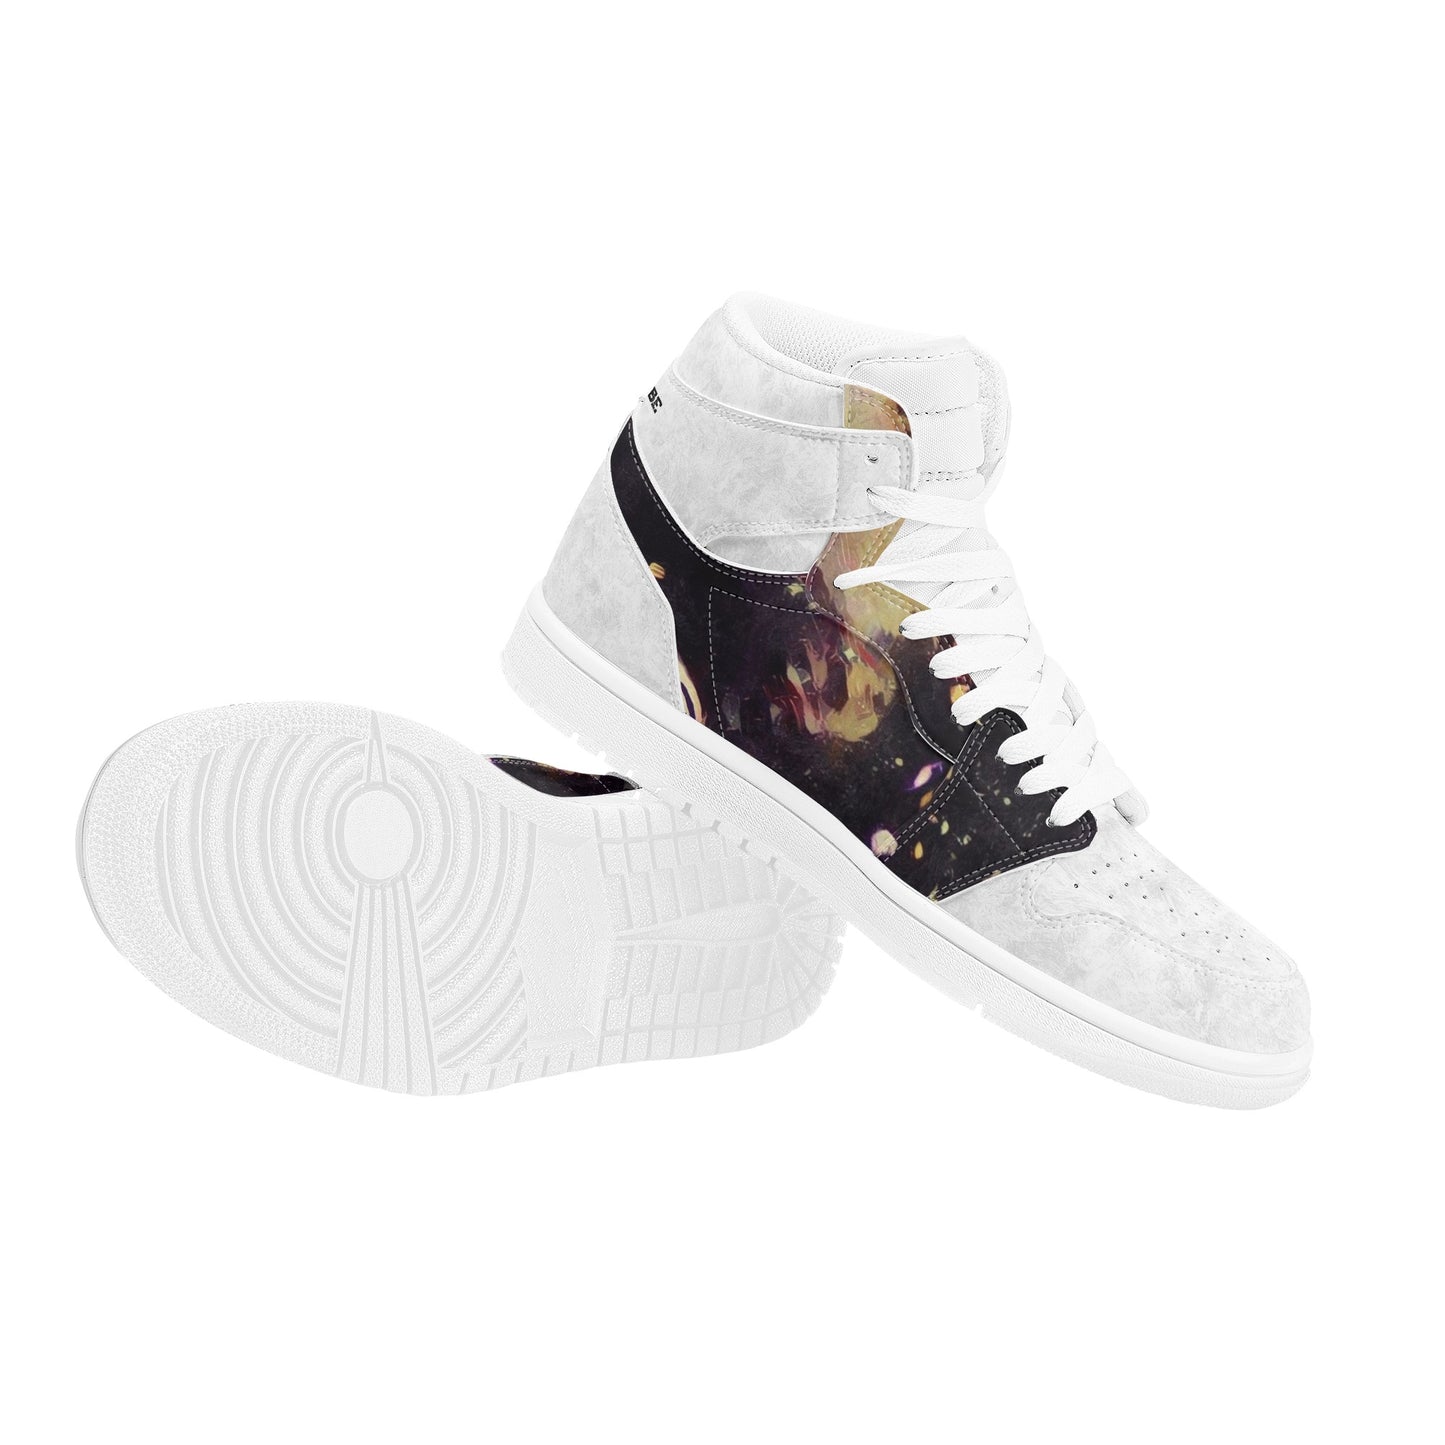 CV20YL - WHAT WILL BE Mens High Top Skateboard Sneakers